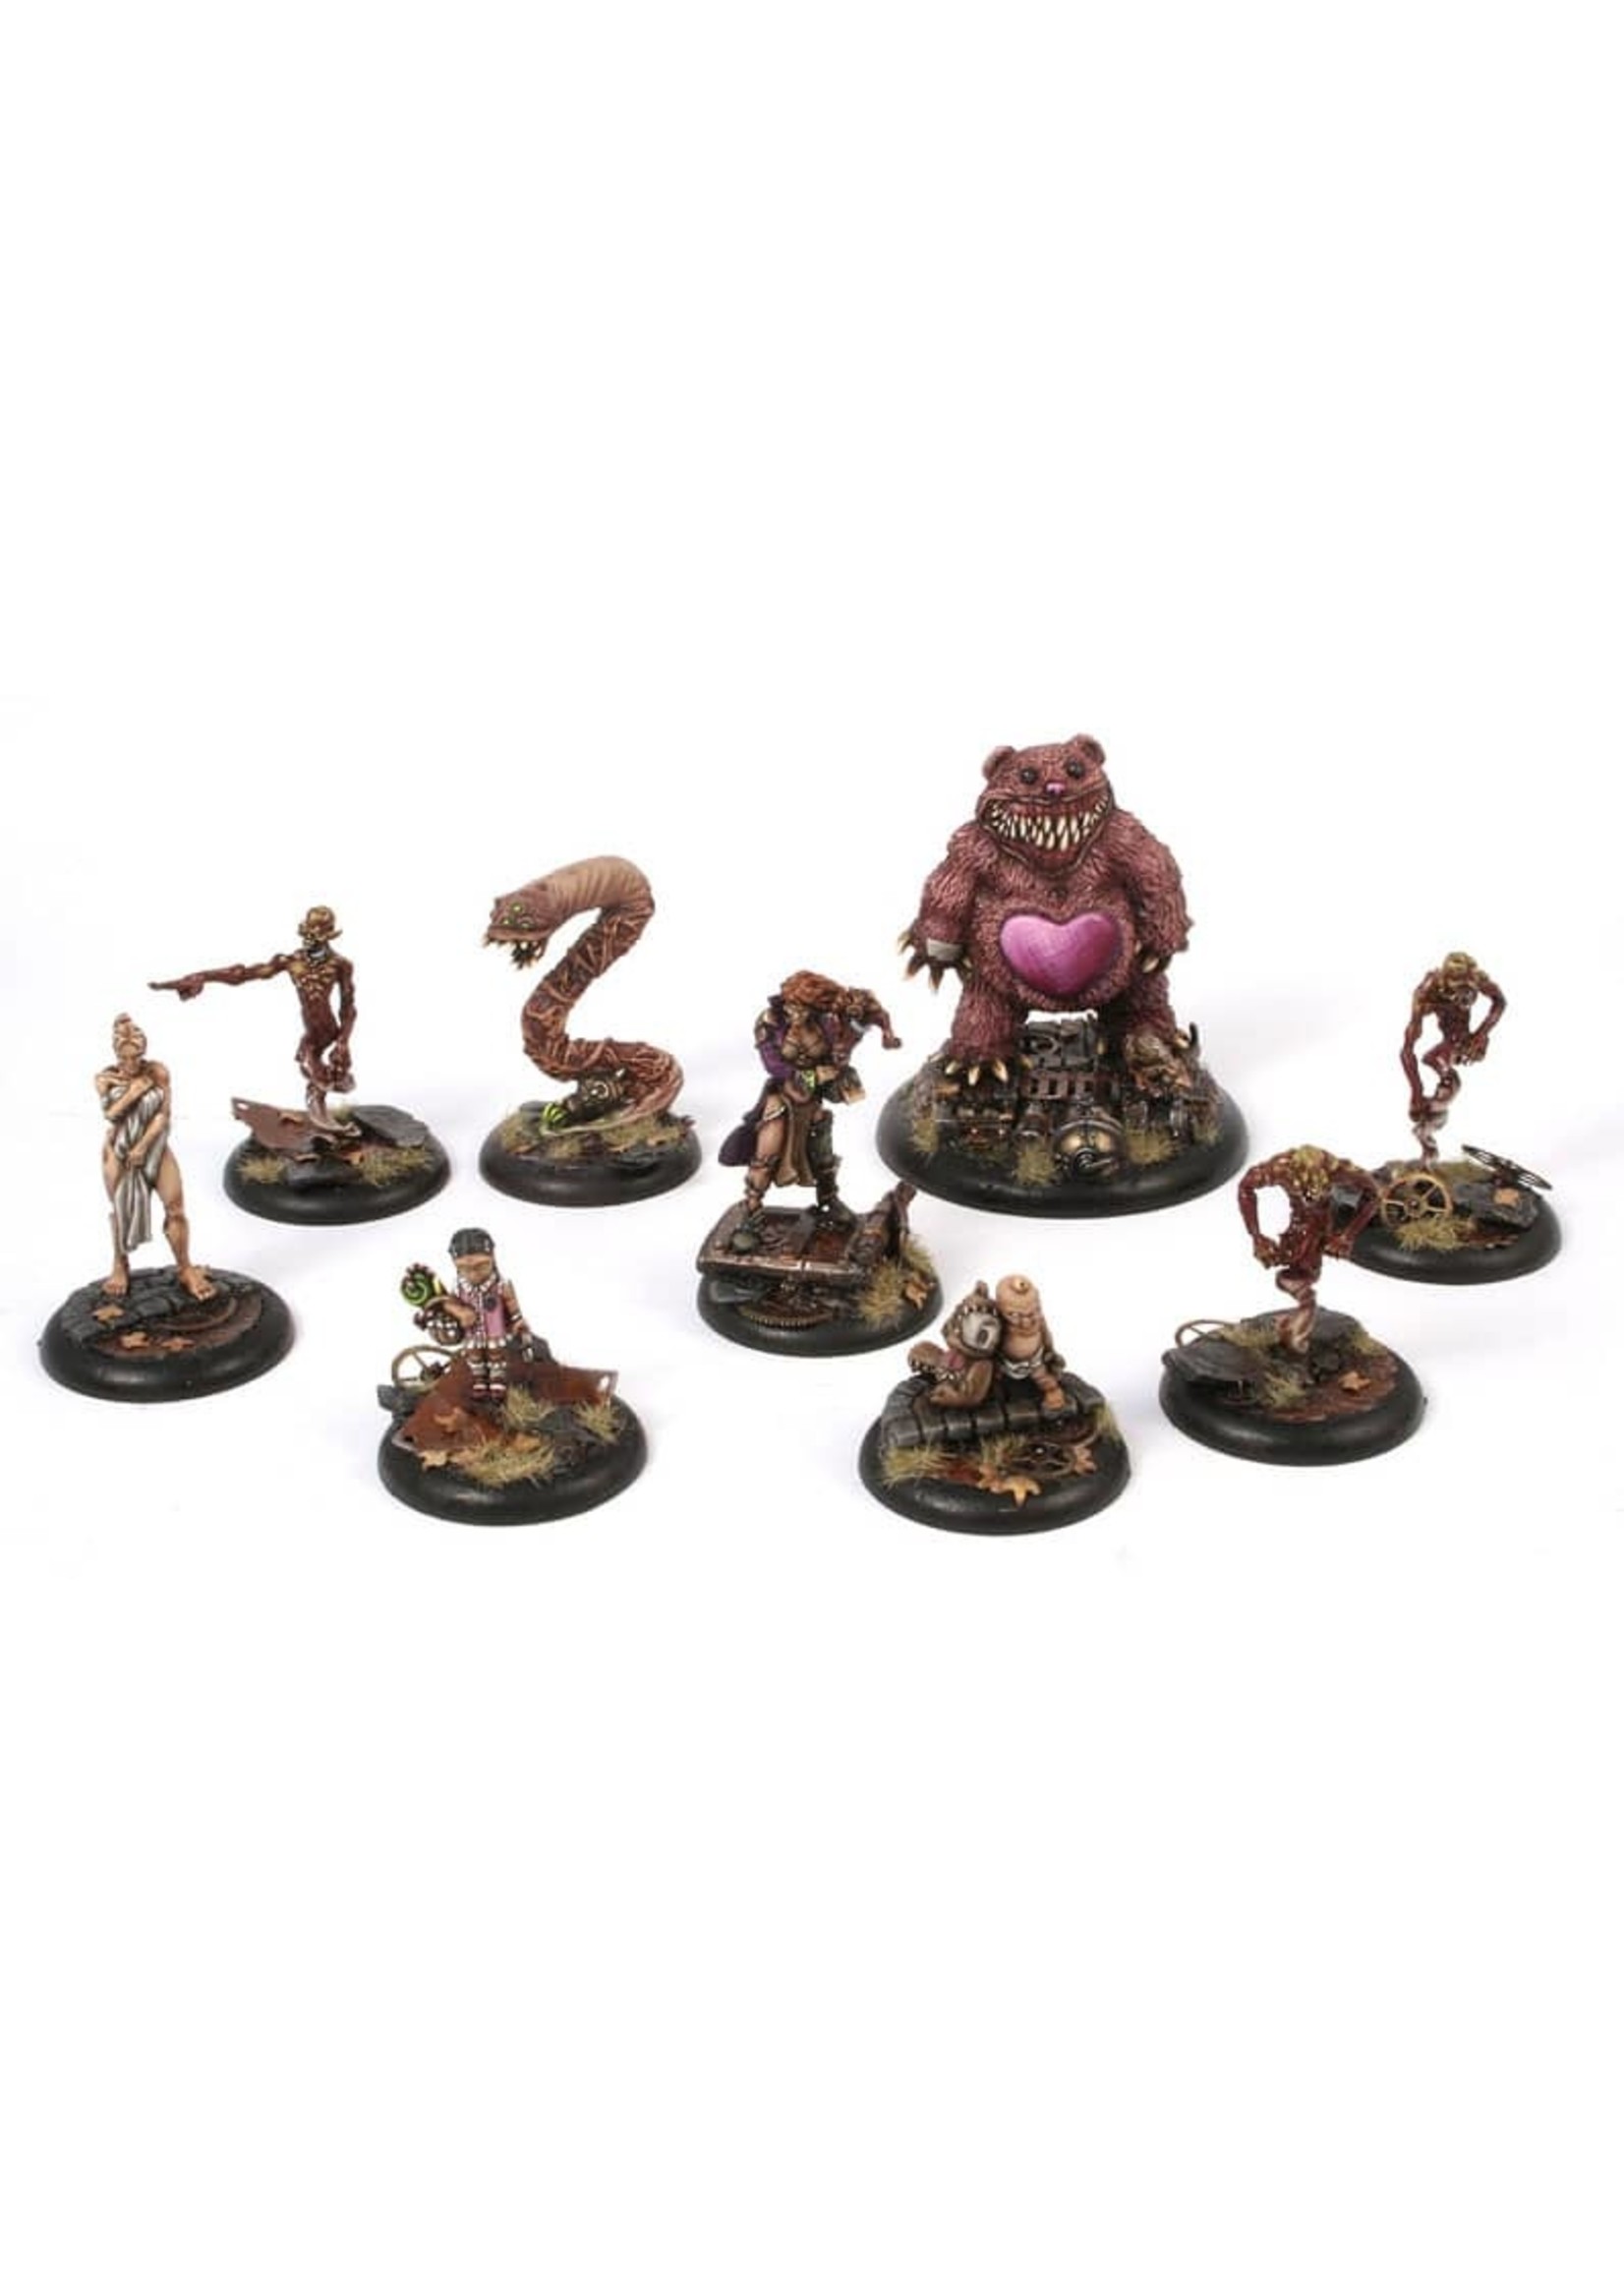 Malifaux Painting Contest